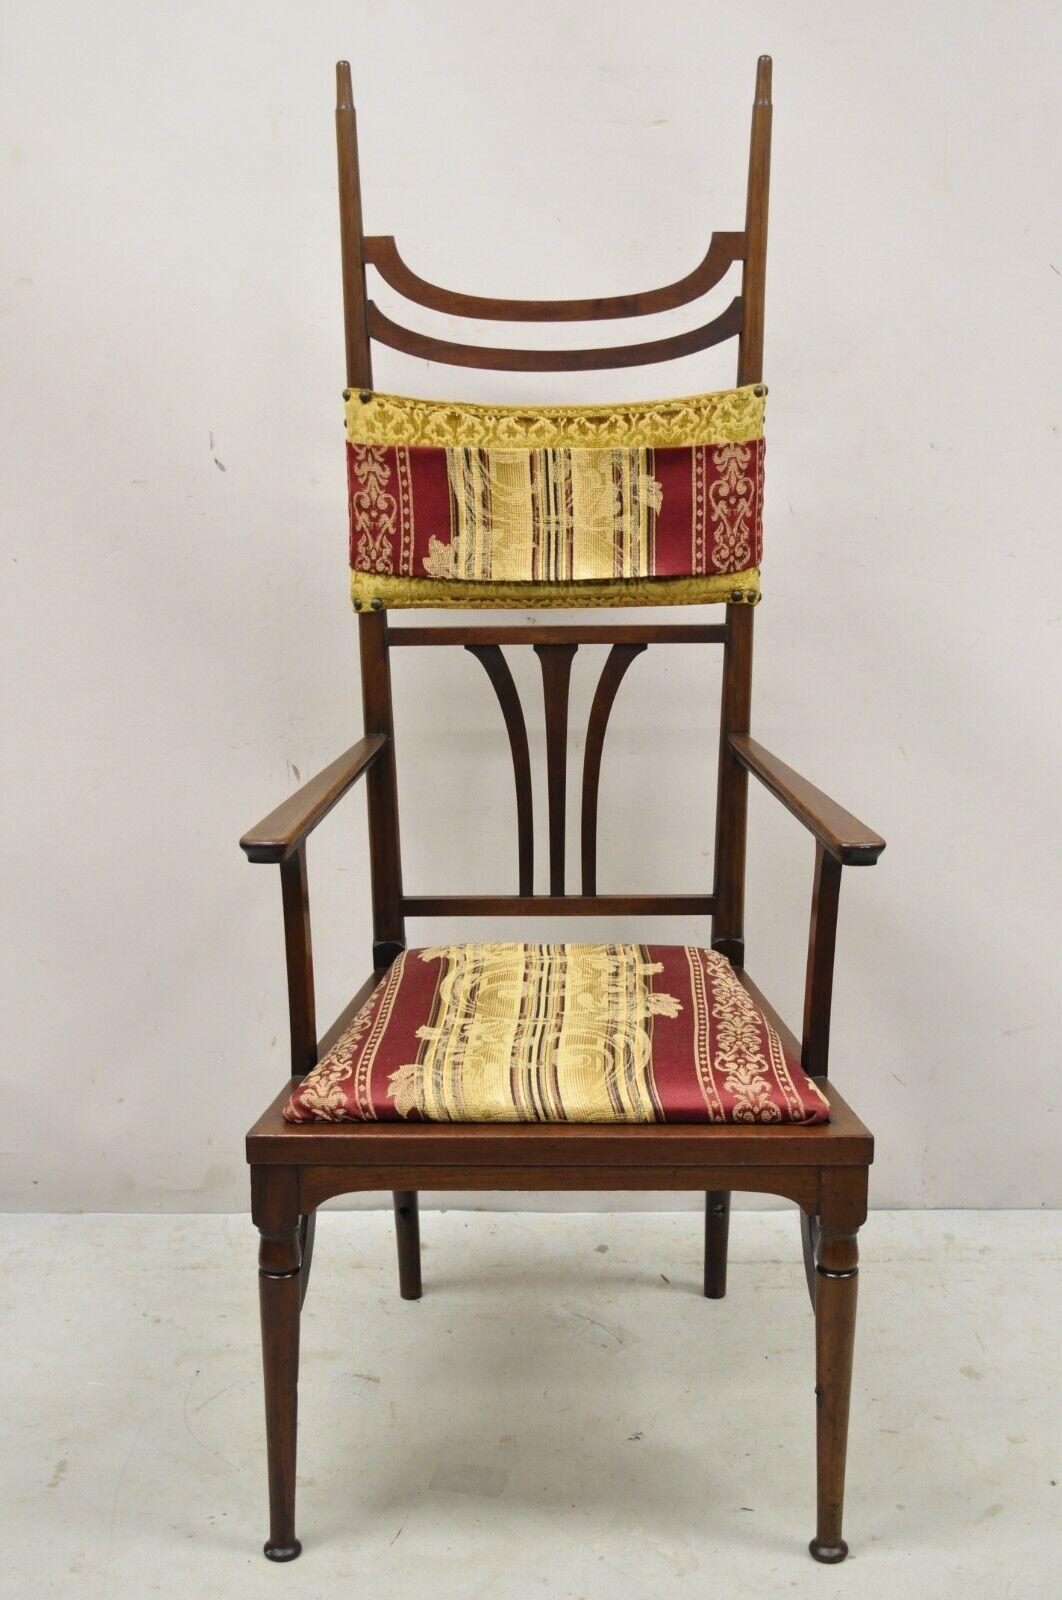 Antique Mahogany Art Nouveau tall finial parlor chair after J.S. Henry. Maker unconfirmed but in the manner of J.S. Henry, tall carved finials, solid mahogany wood frames, nicely carved details, tapered legs, very nice antique item, quality